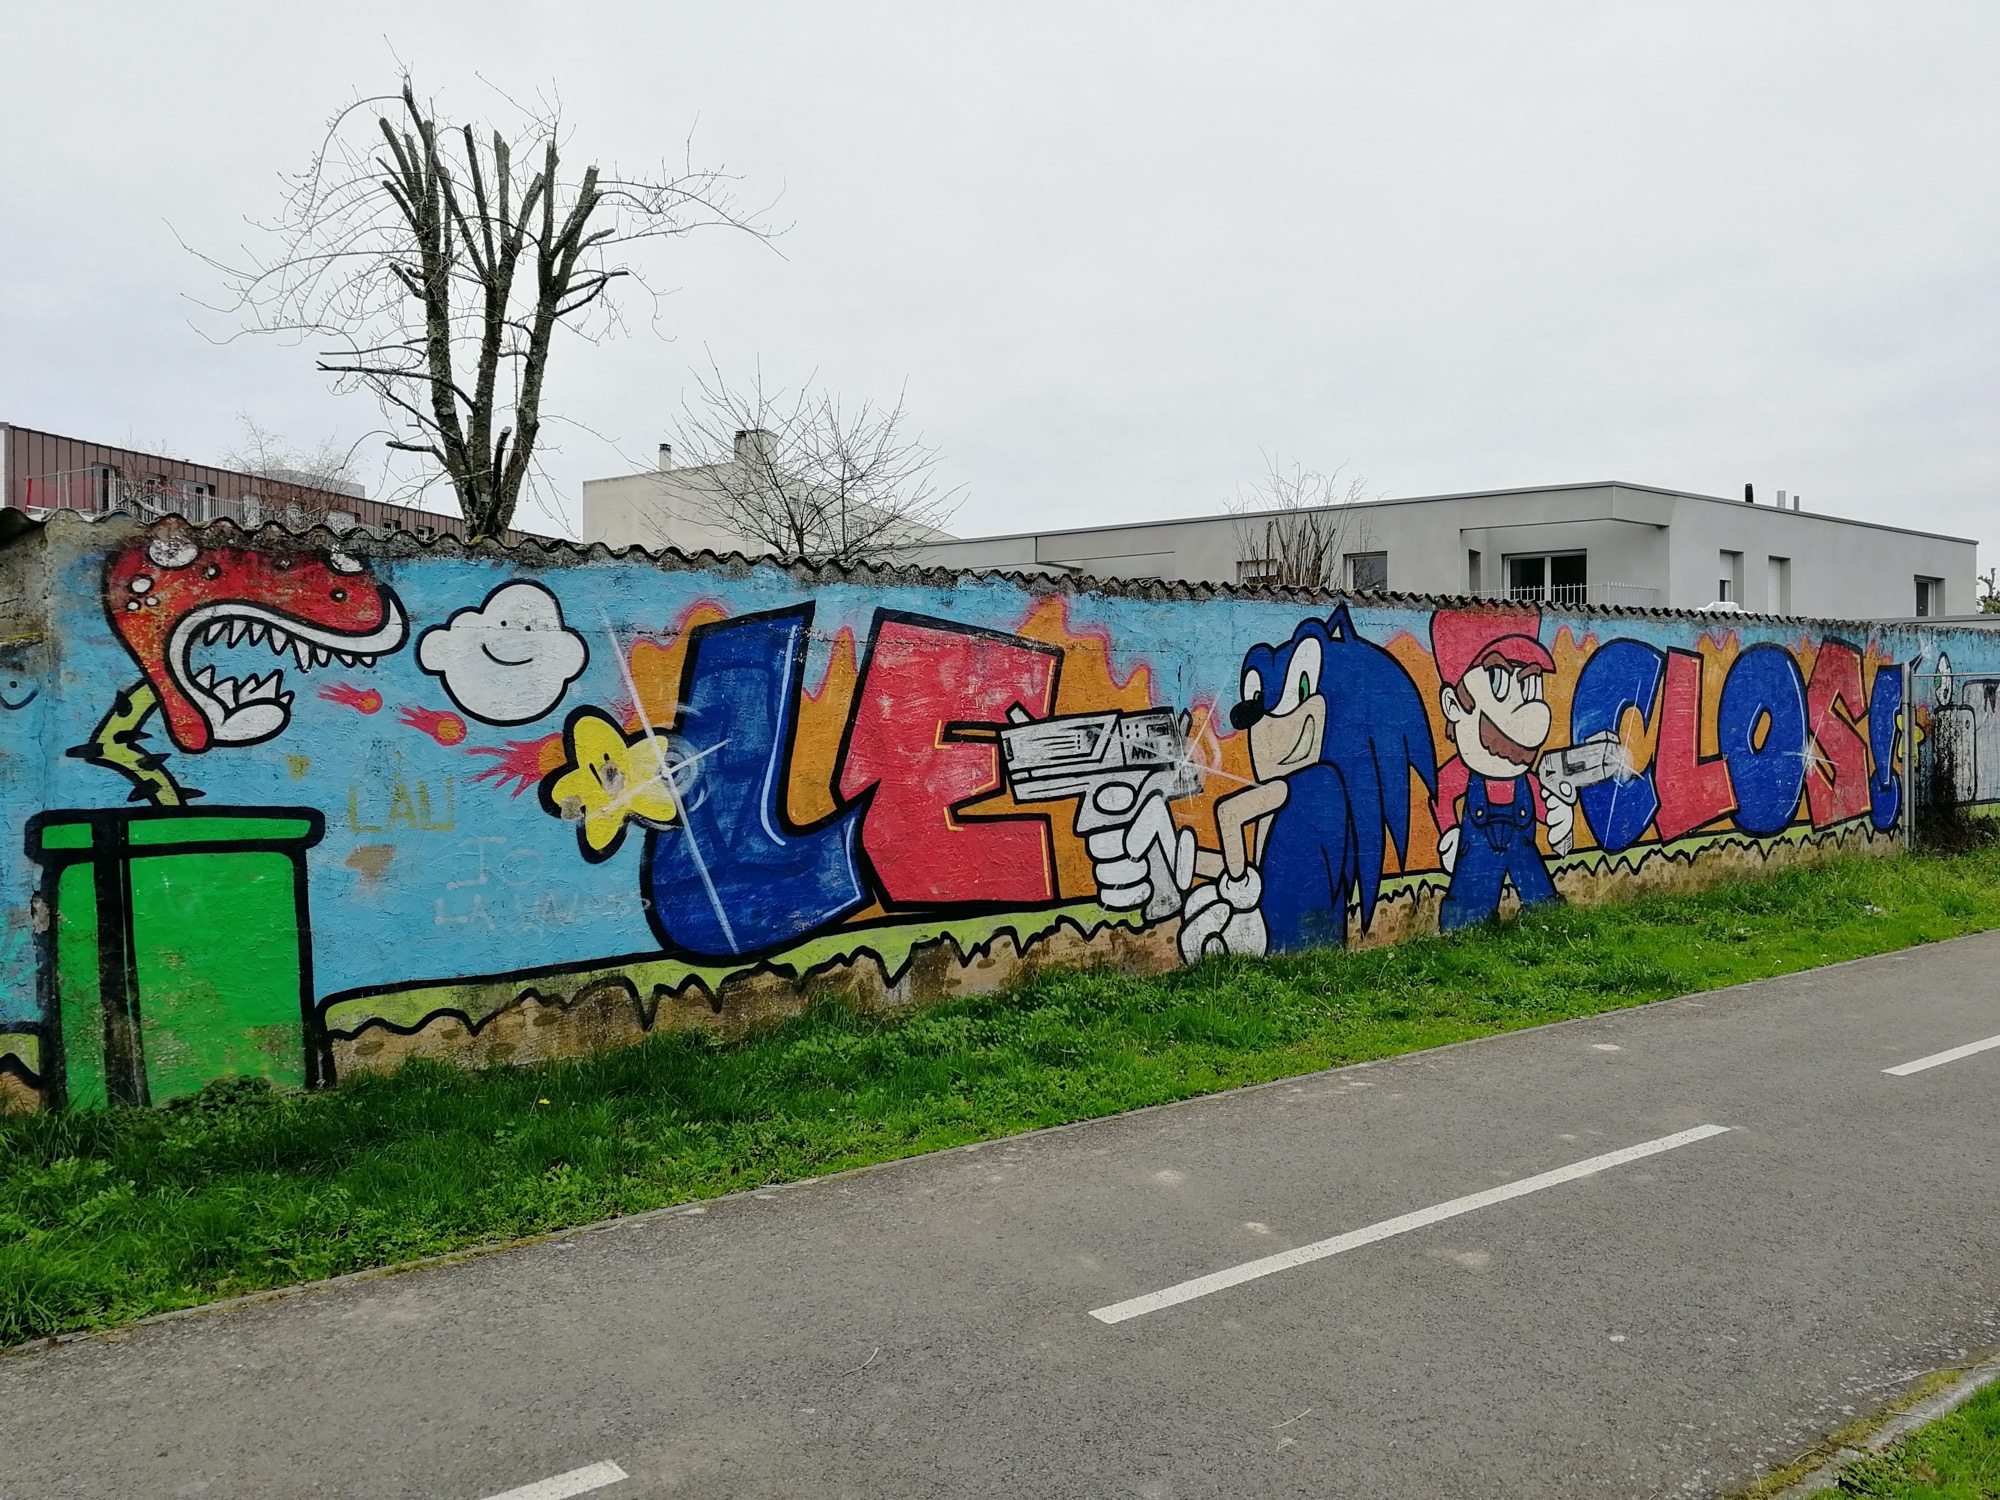 Graffiti 571 Sonic et Mario captured by Rabot in Nantes France